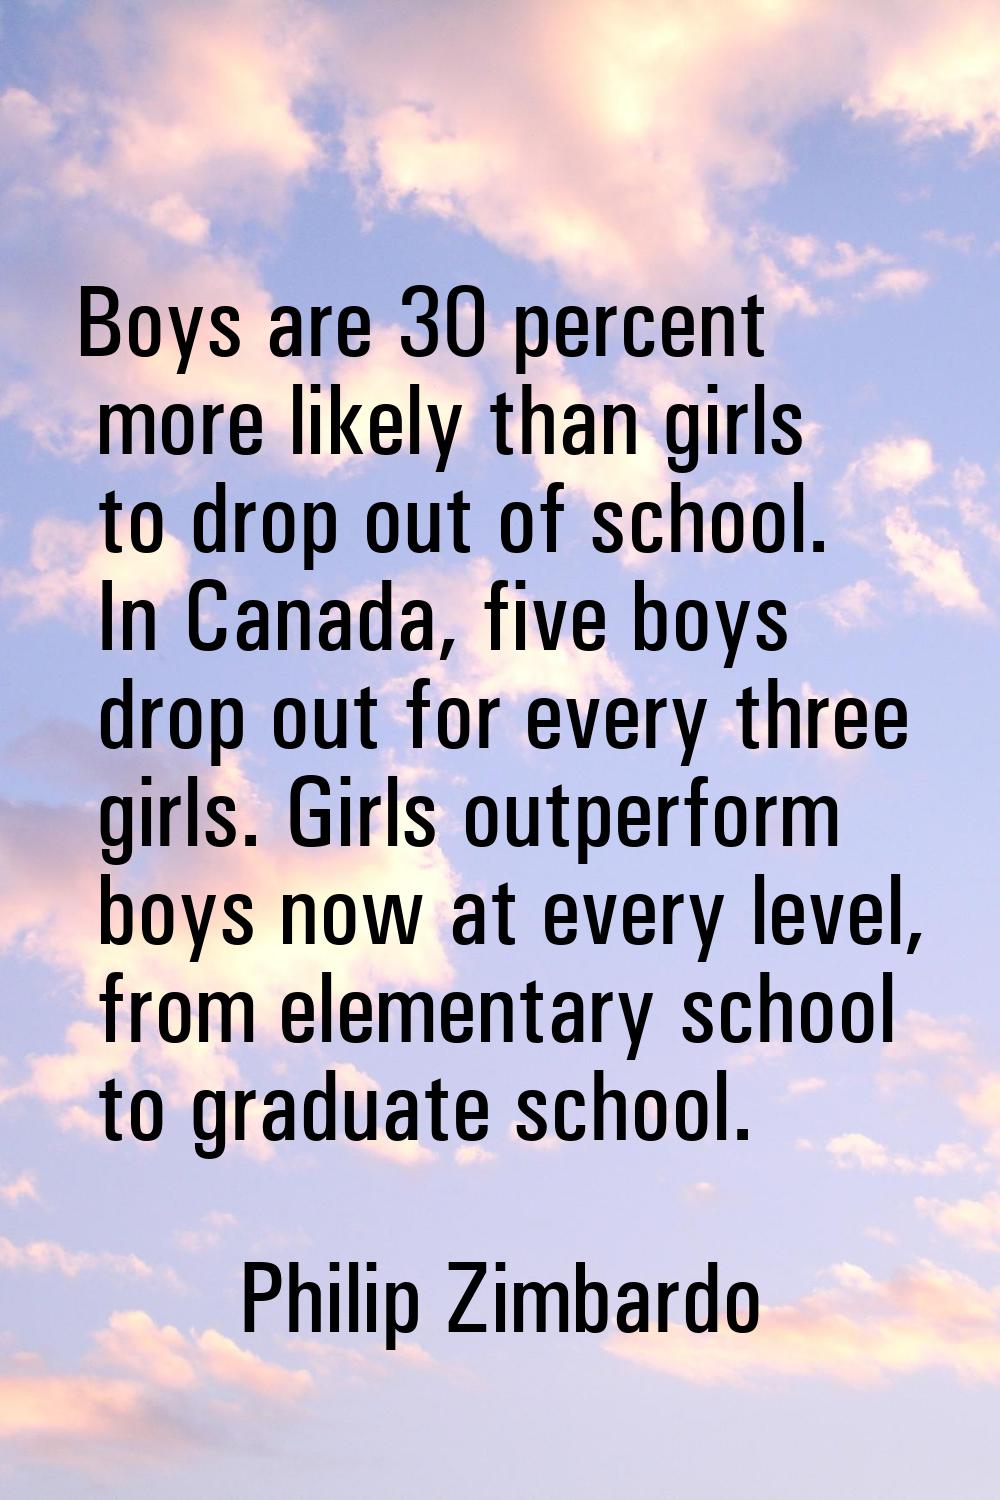 Boys are 30 percent more likely than girls to drop out of school. In Canada, five boys drop out for